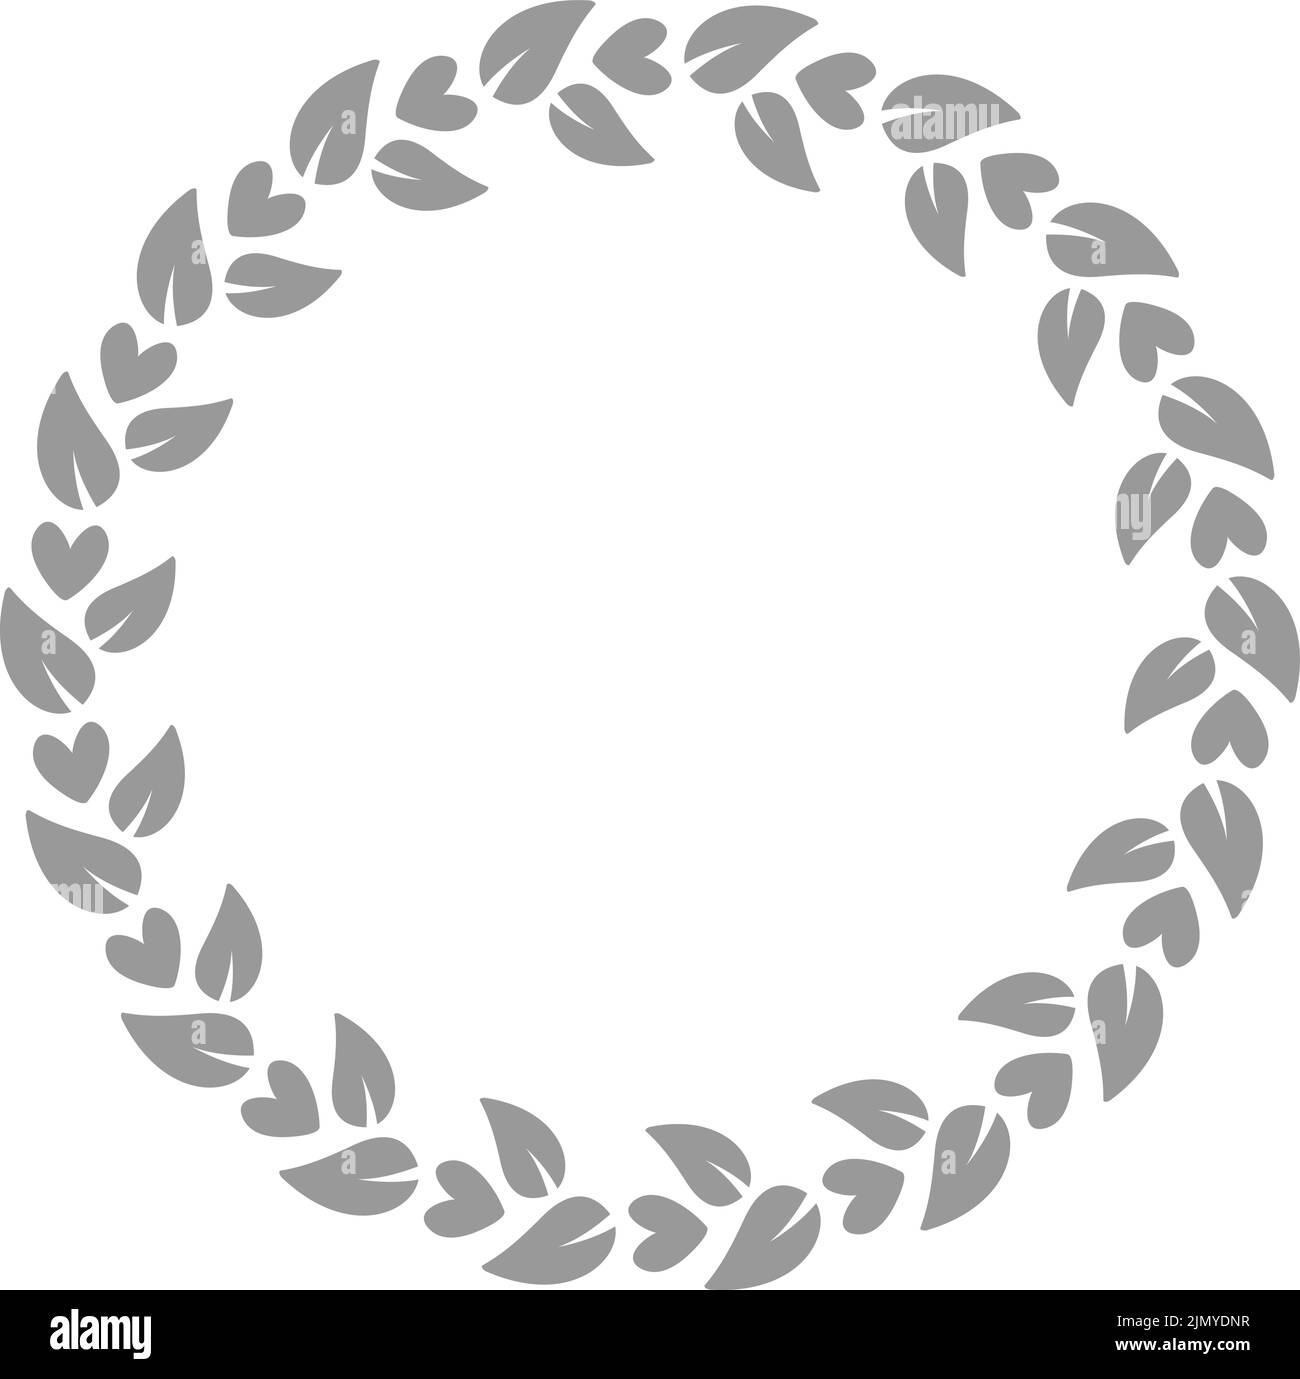 Vector Hand drawn floral frame with leaves. Decorative elements for wedding invitation, holiday design. Romantic branches silhouette illustration Stock Vector